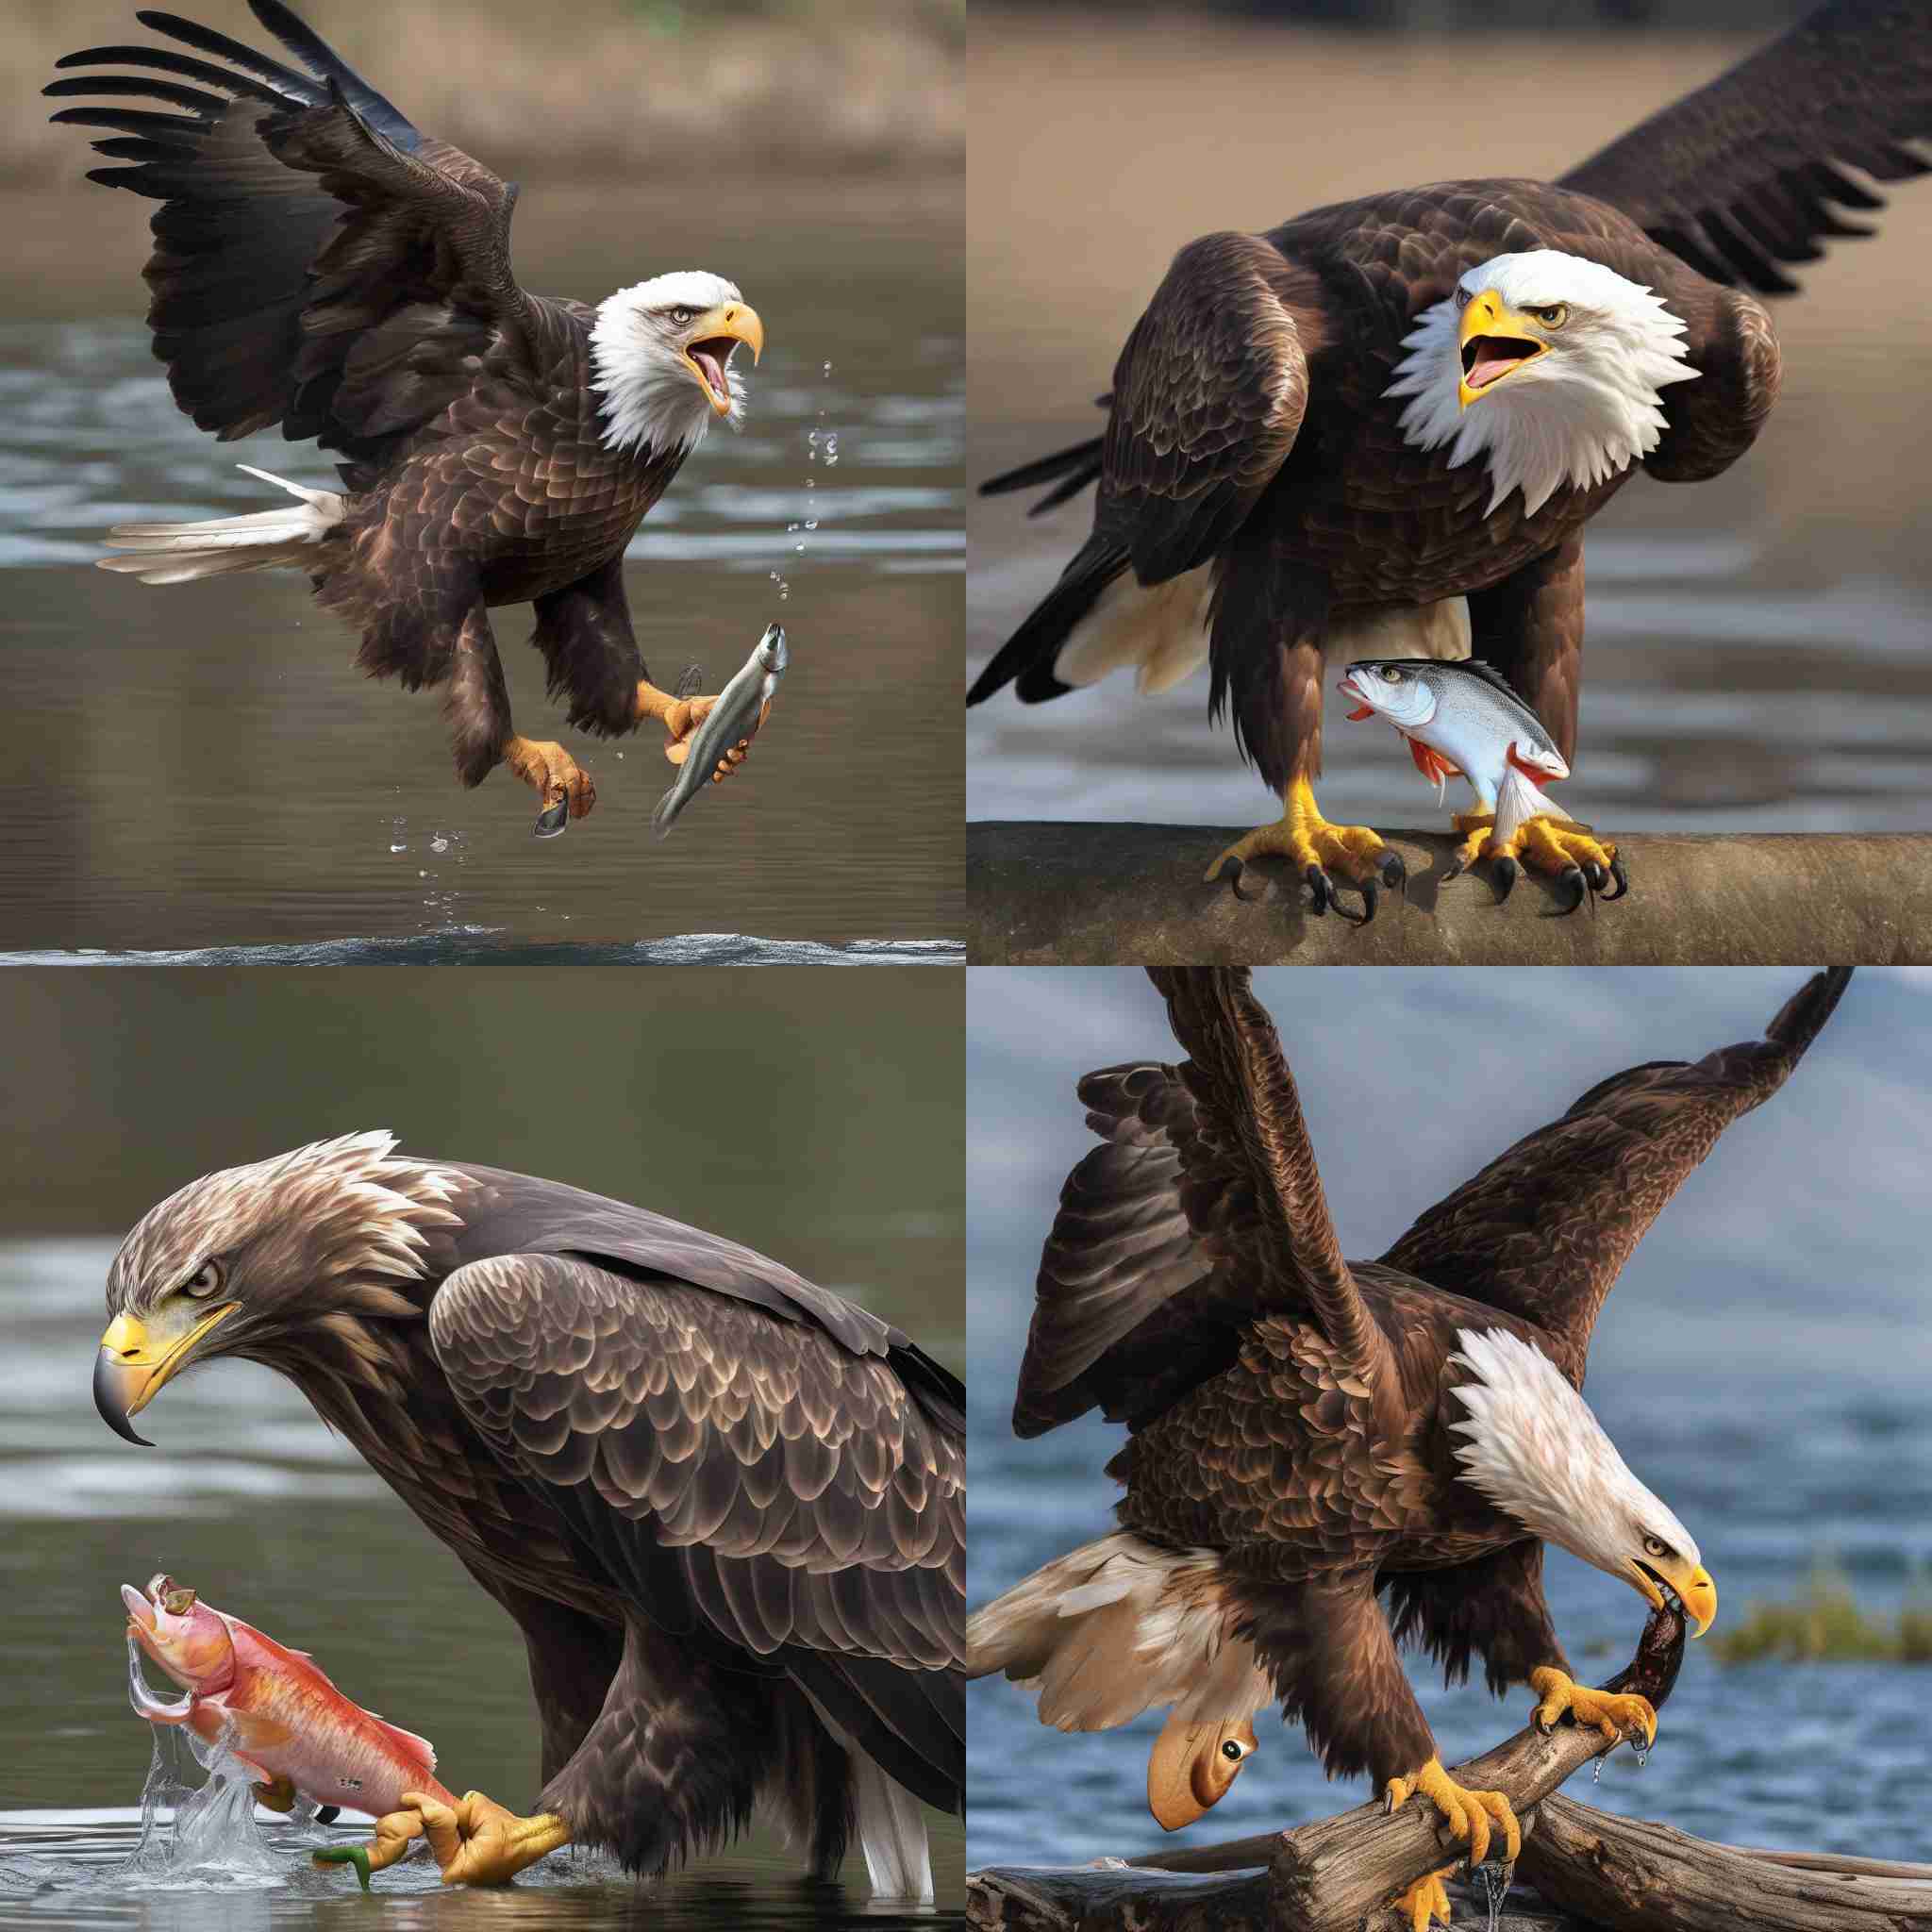 An eagle eating a fish